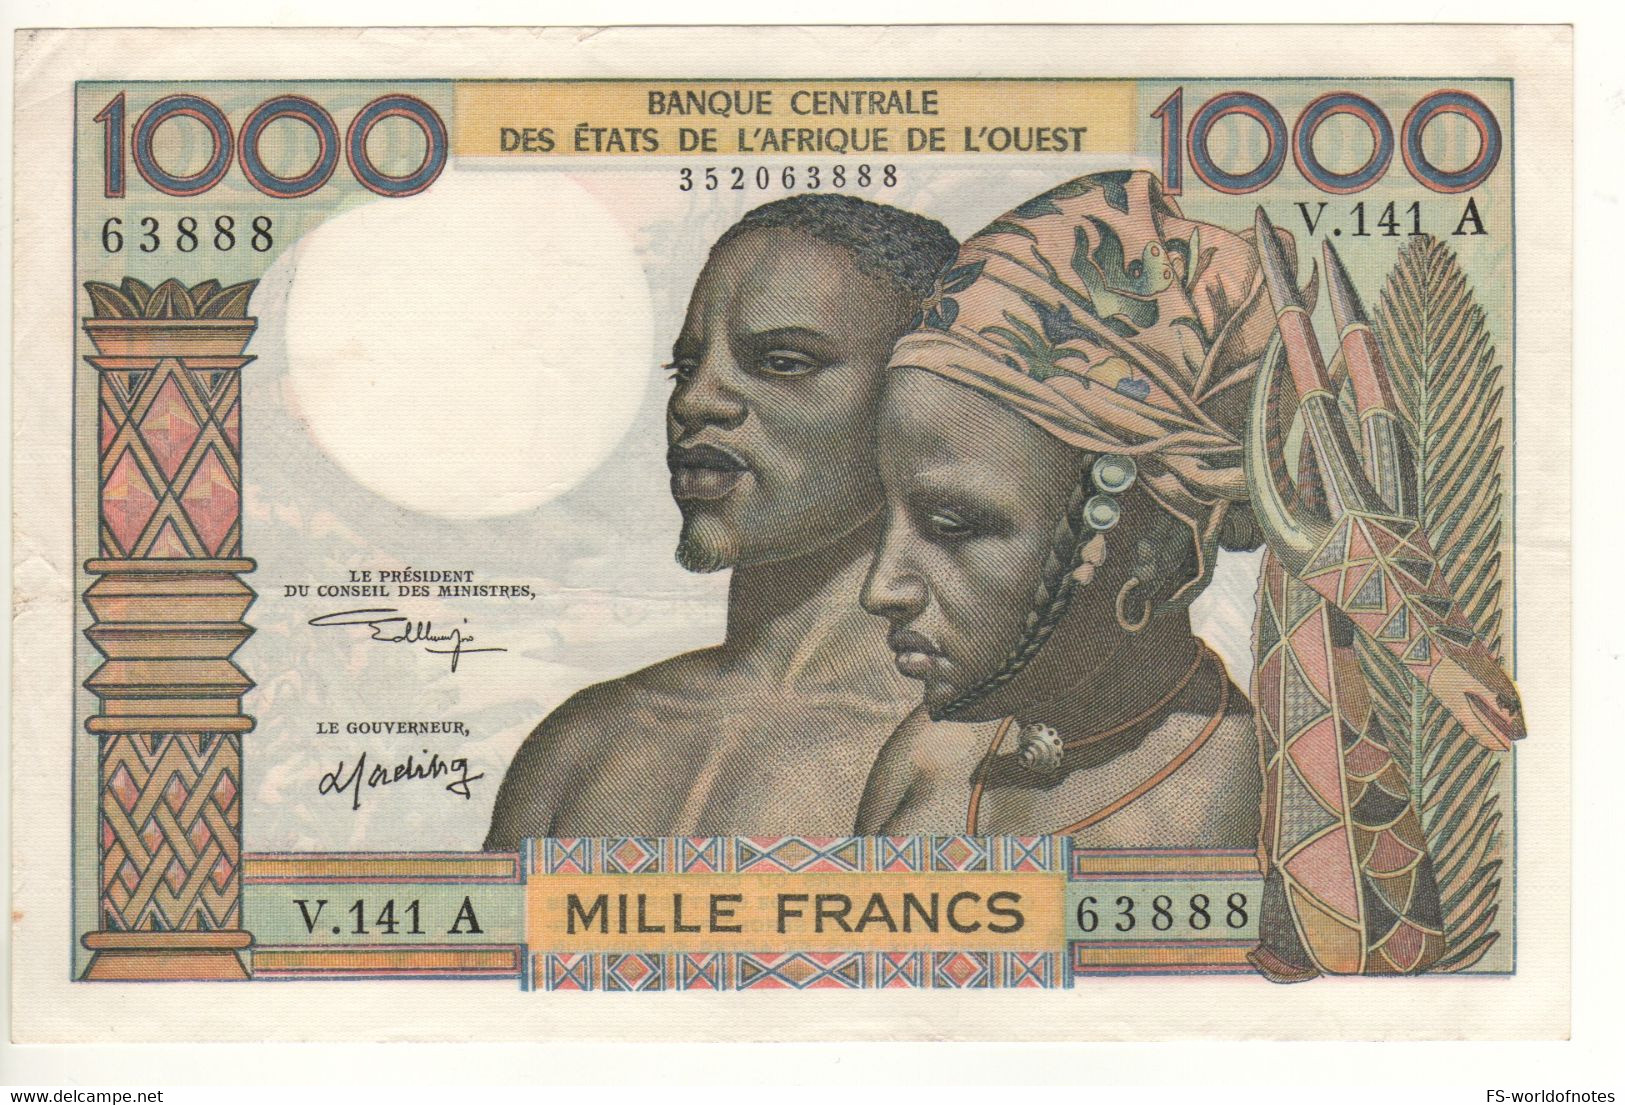 Ivory Coast   WEST AFRICAN STATES   Attractive   1'000 Francs P103Ak  ( ND  1965 ) - Ivoorkust